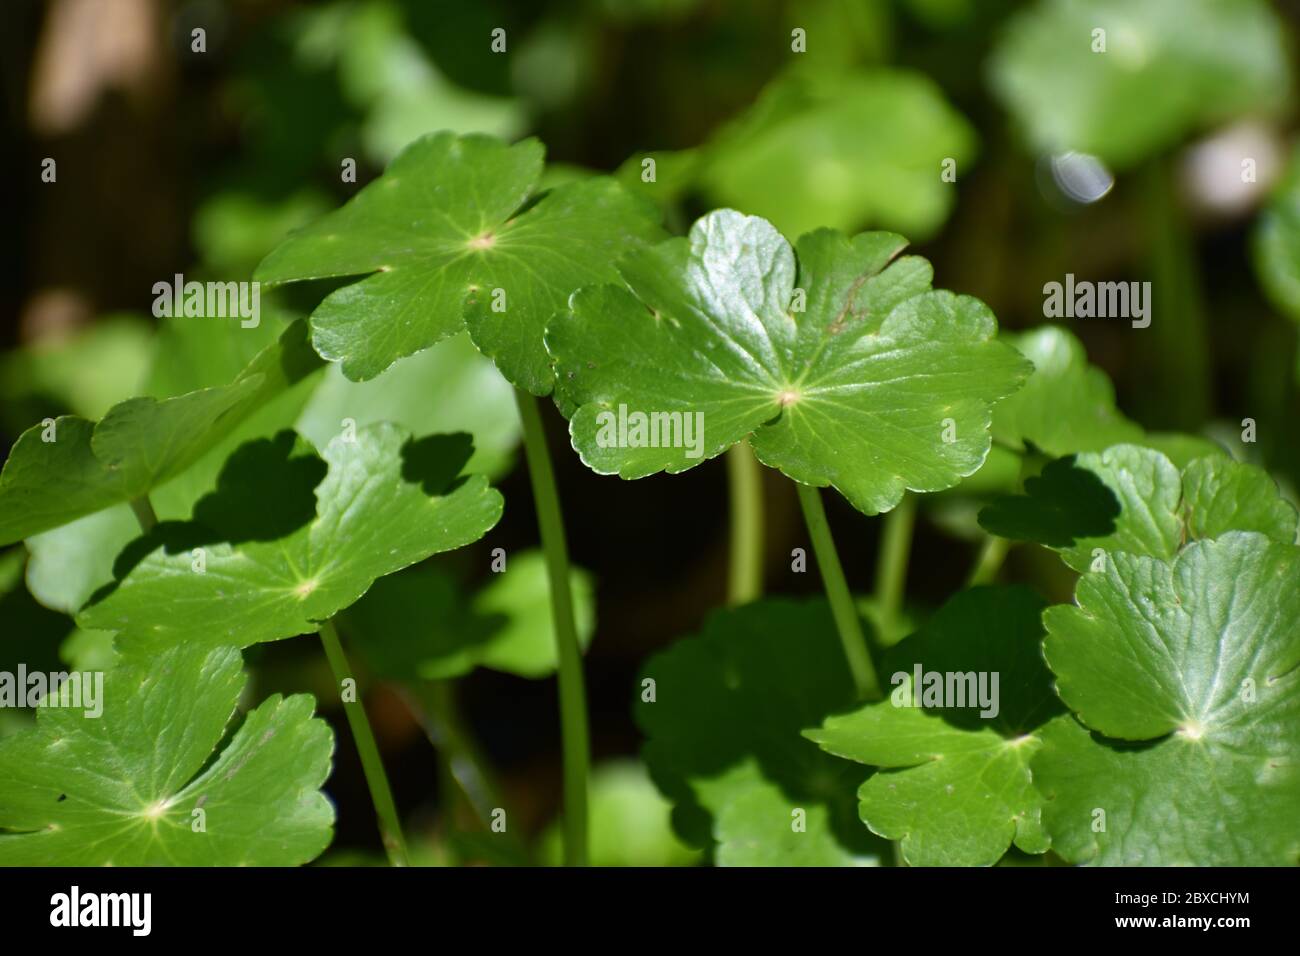 Leaves of floating marsh pennywort (Hydrocotyle ranunculoides) growing on Pinto Lake in California Stock Photo